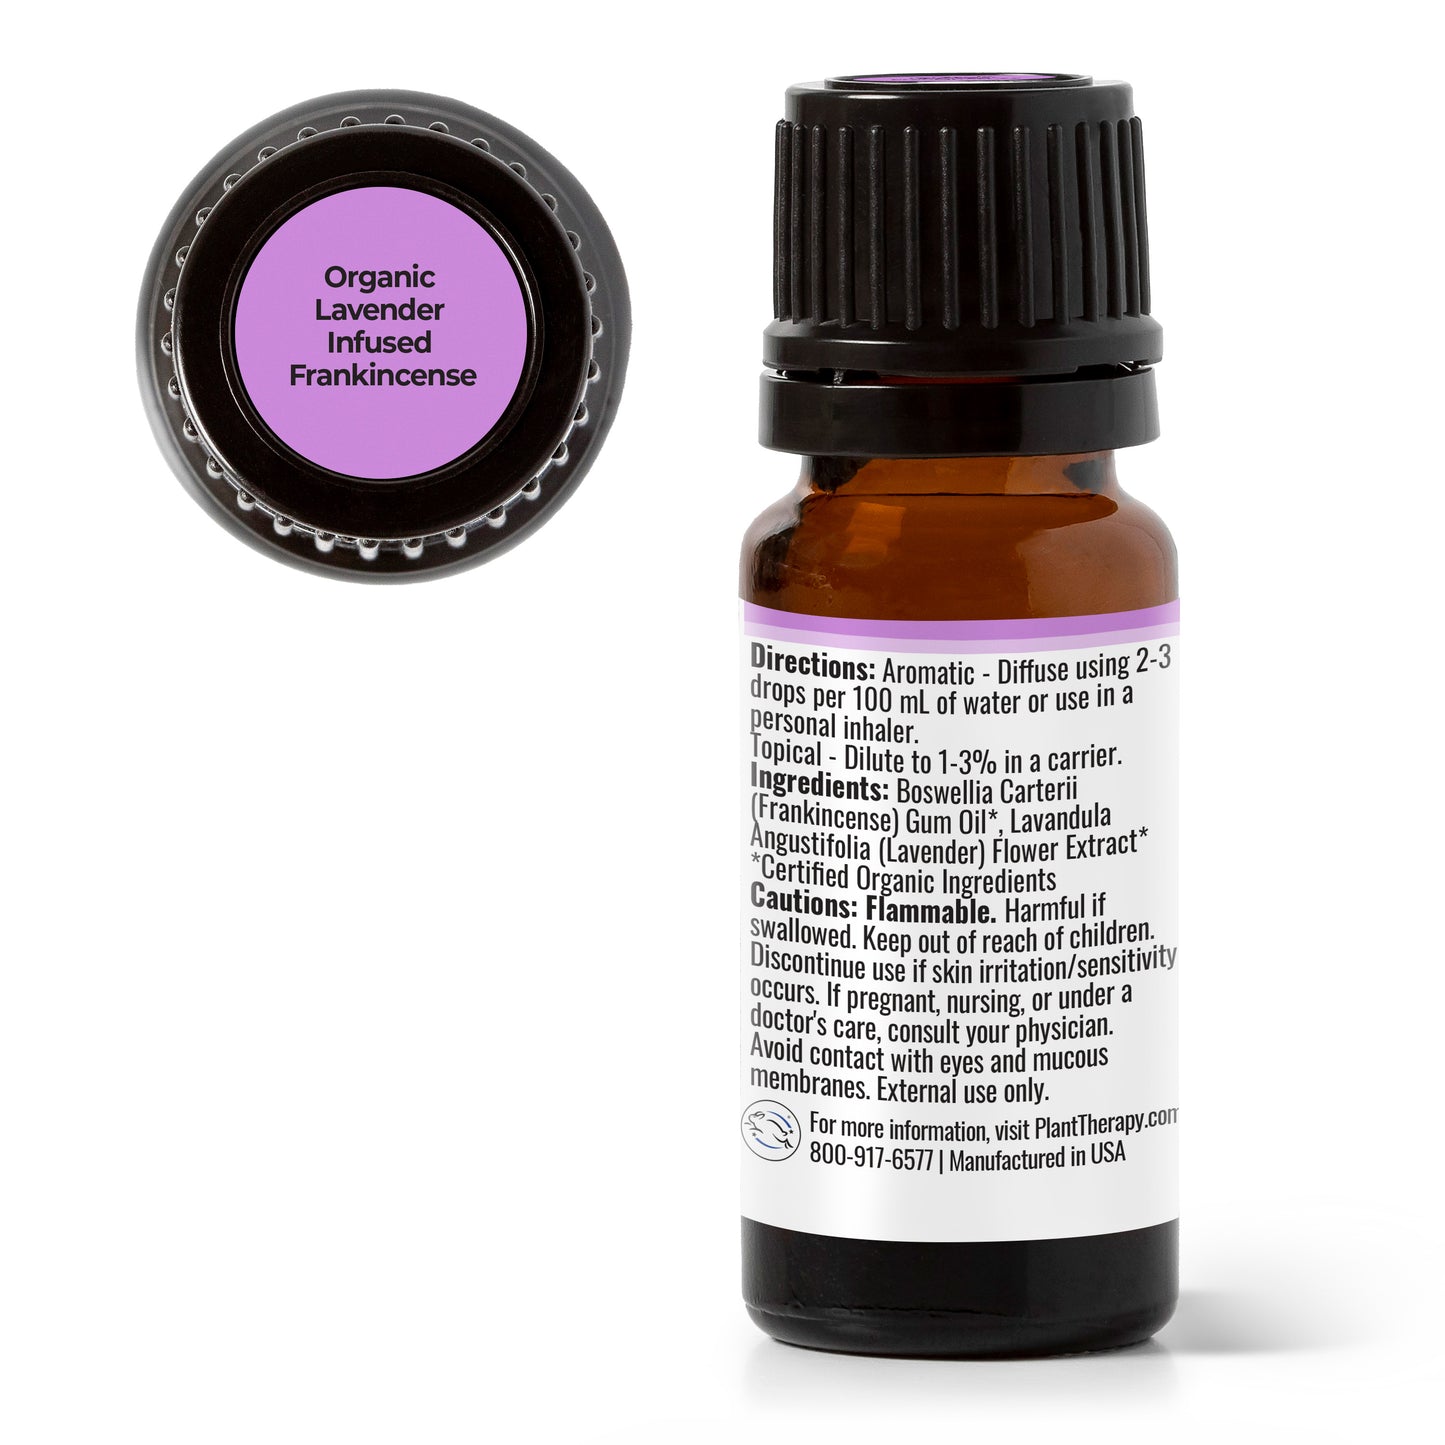 Organic Lavender Infused Frankincense Essential Oil Infusion